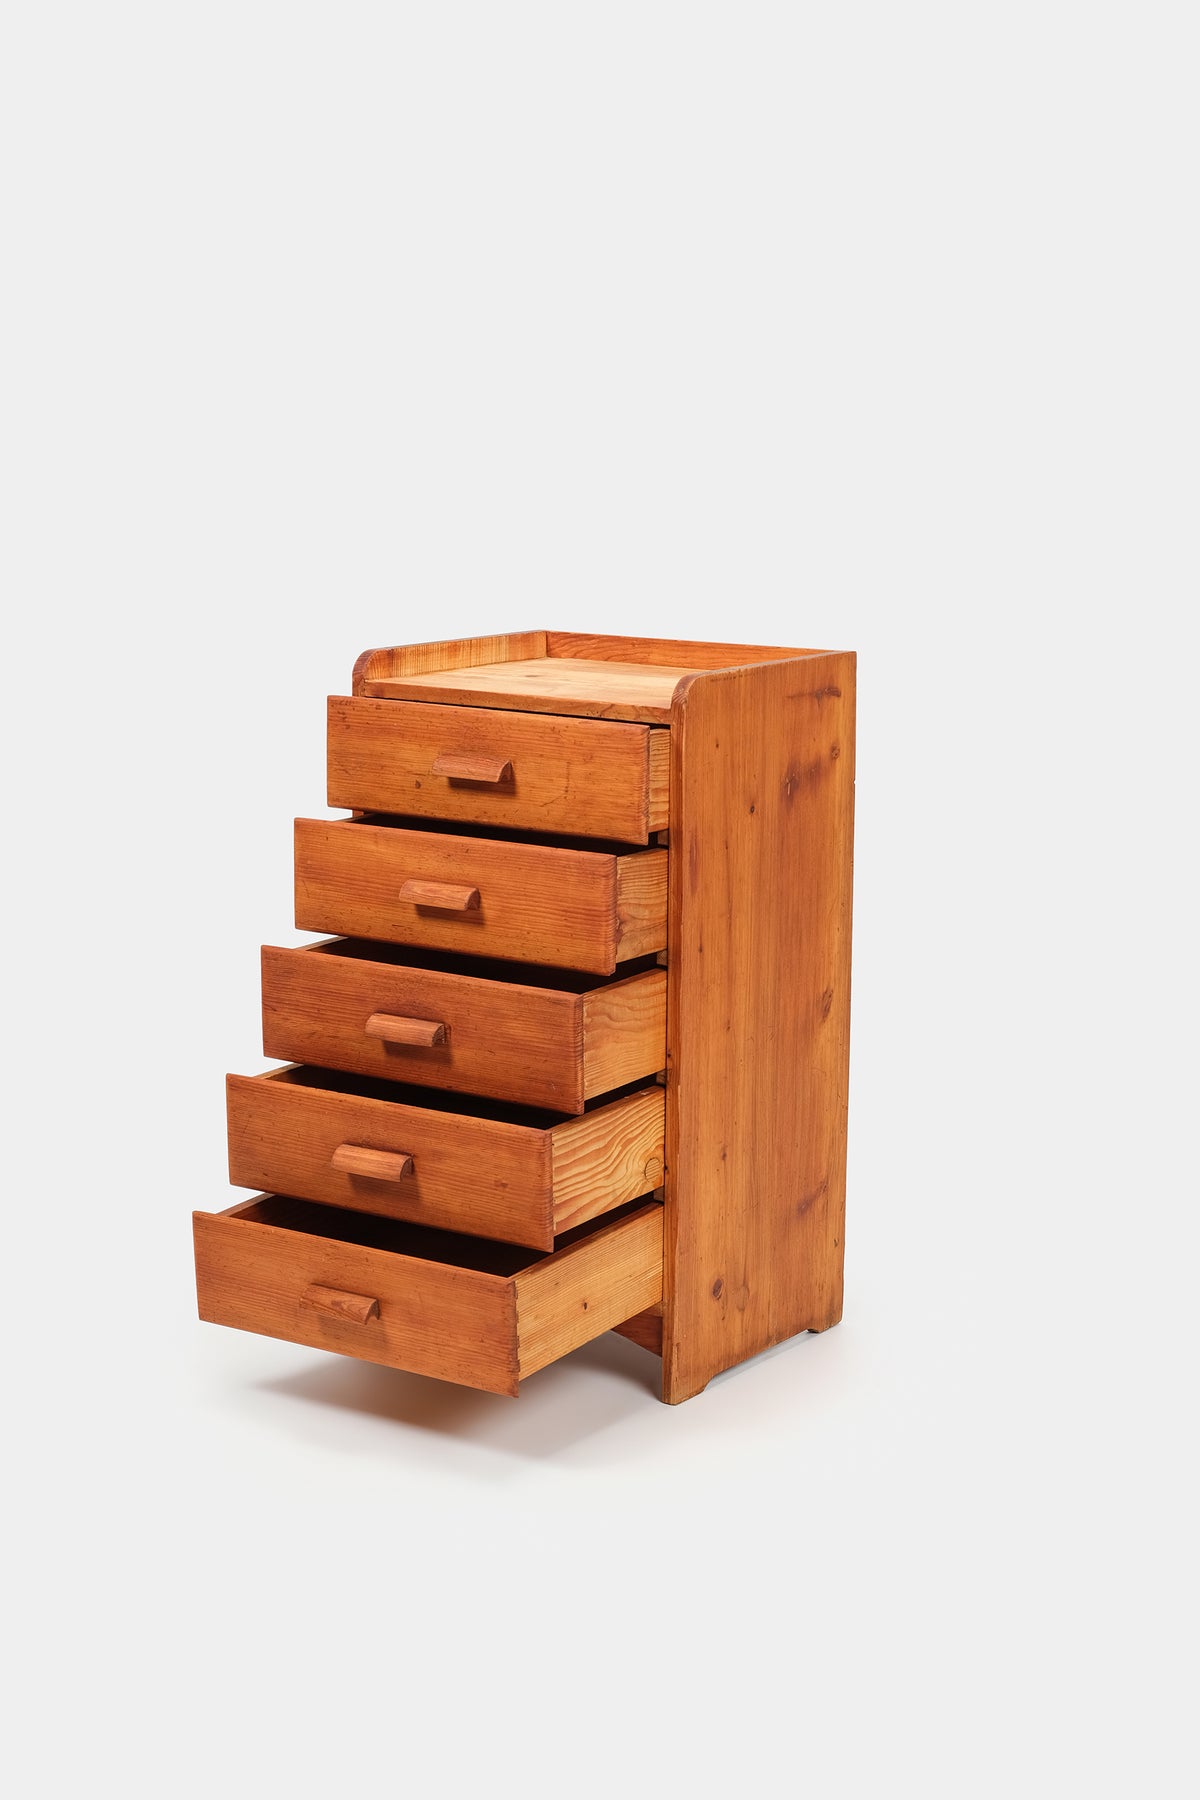 Chest of Drawers, Bauhaus, Germany, 20s